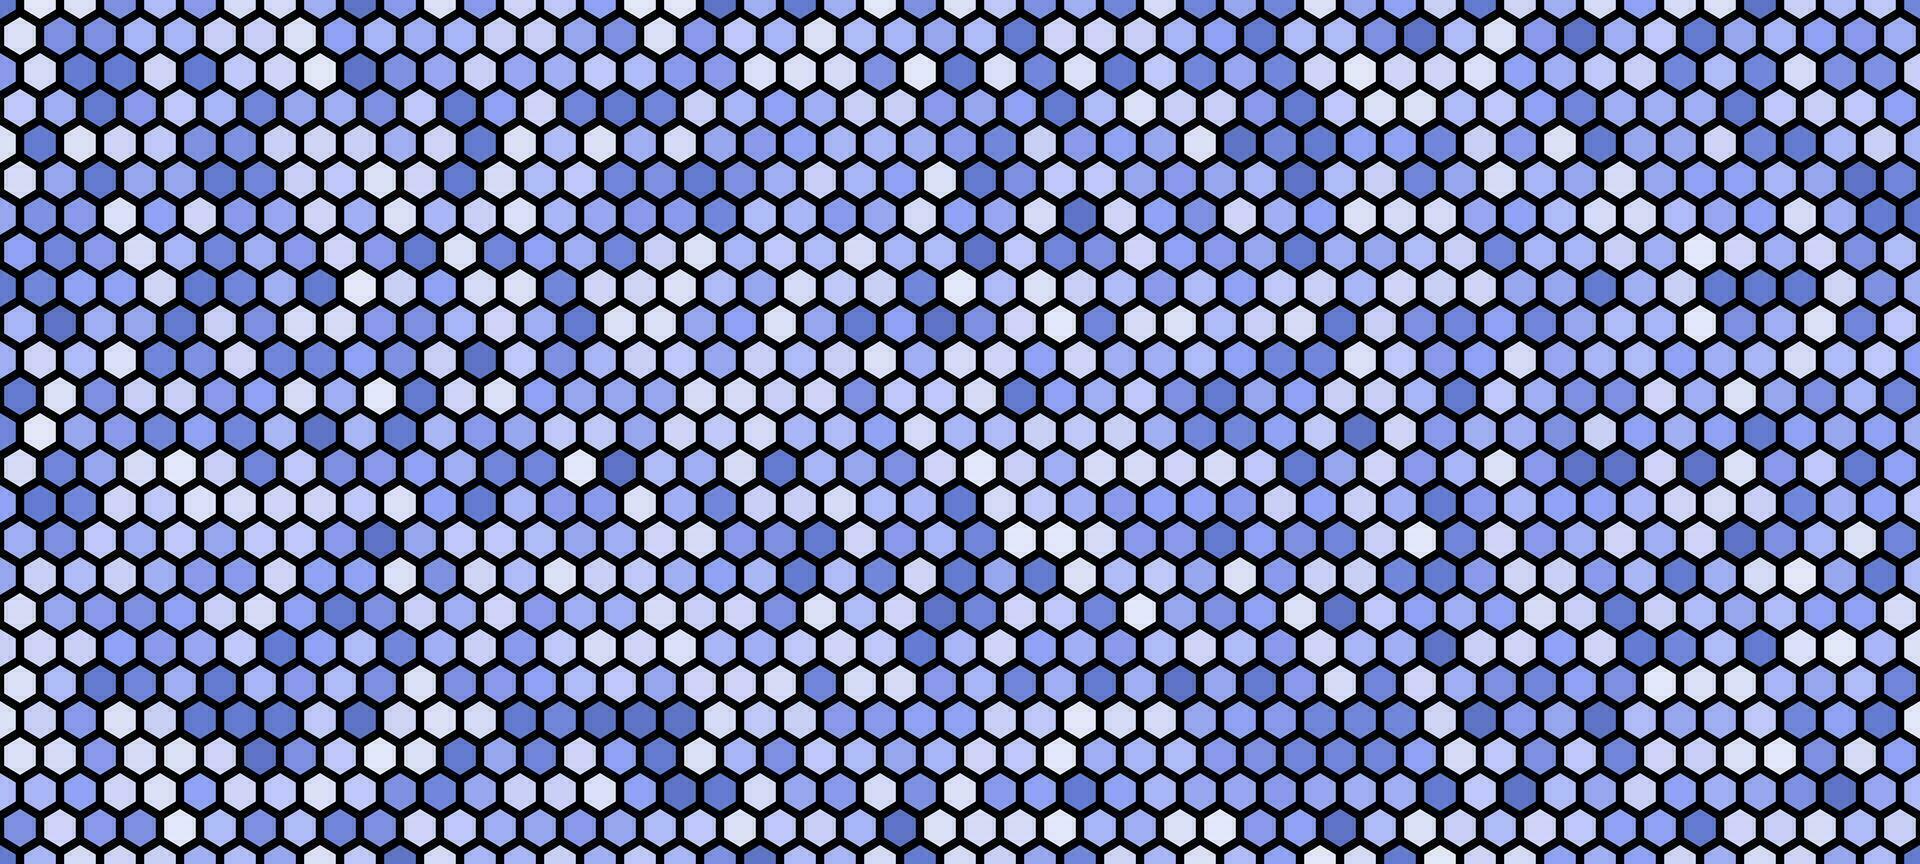 Abstract hexagonal geometric pattern blue background vector